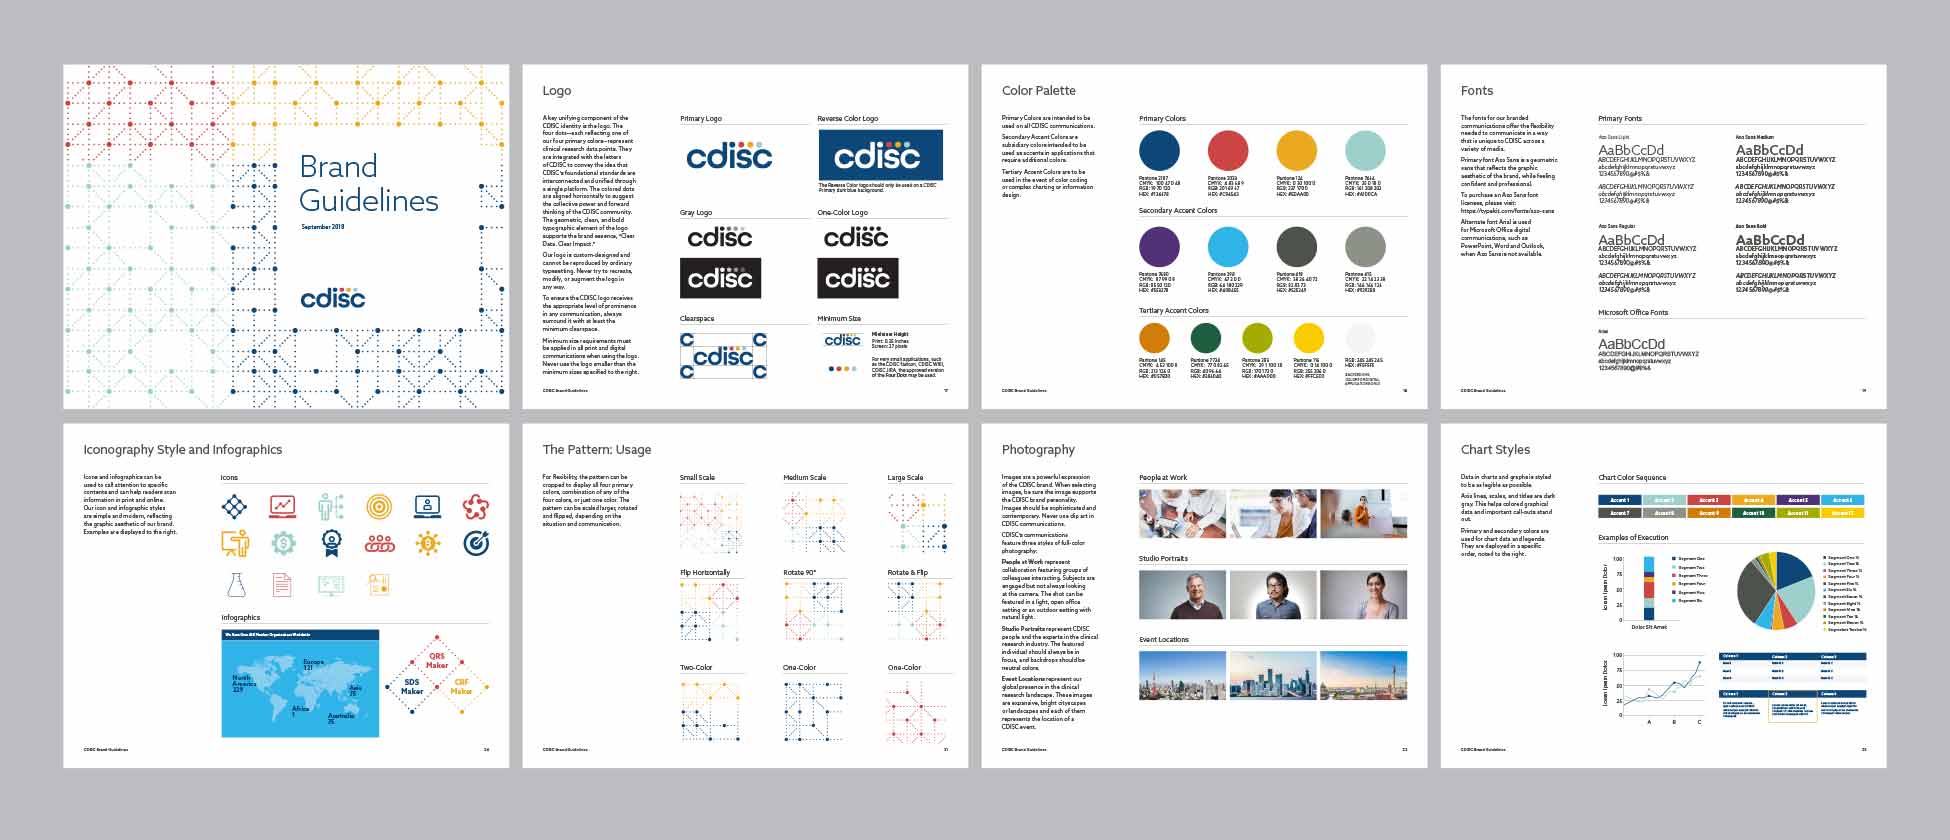 cdisc brand guidelines